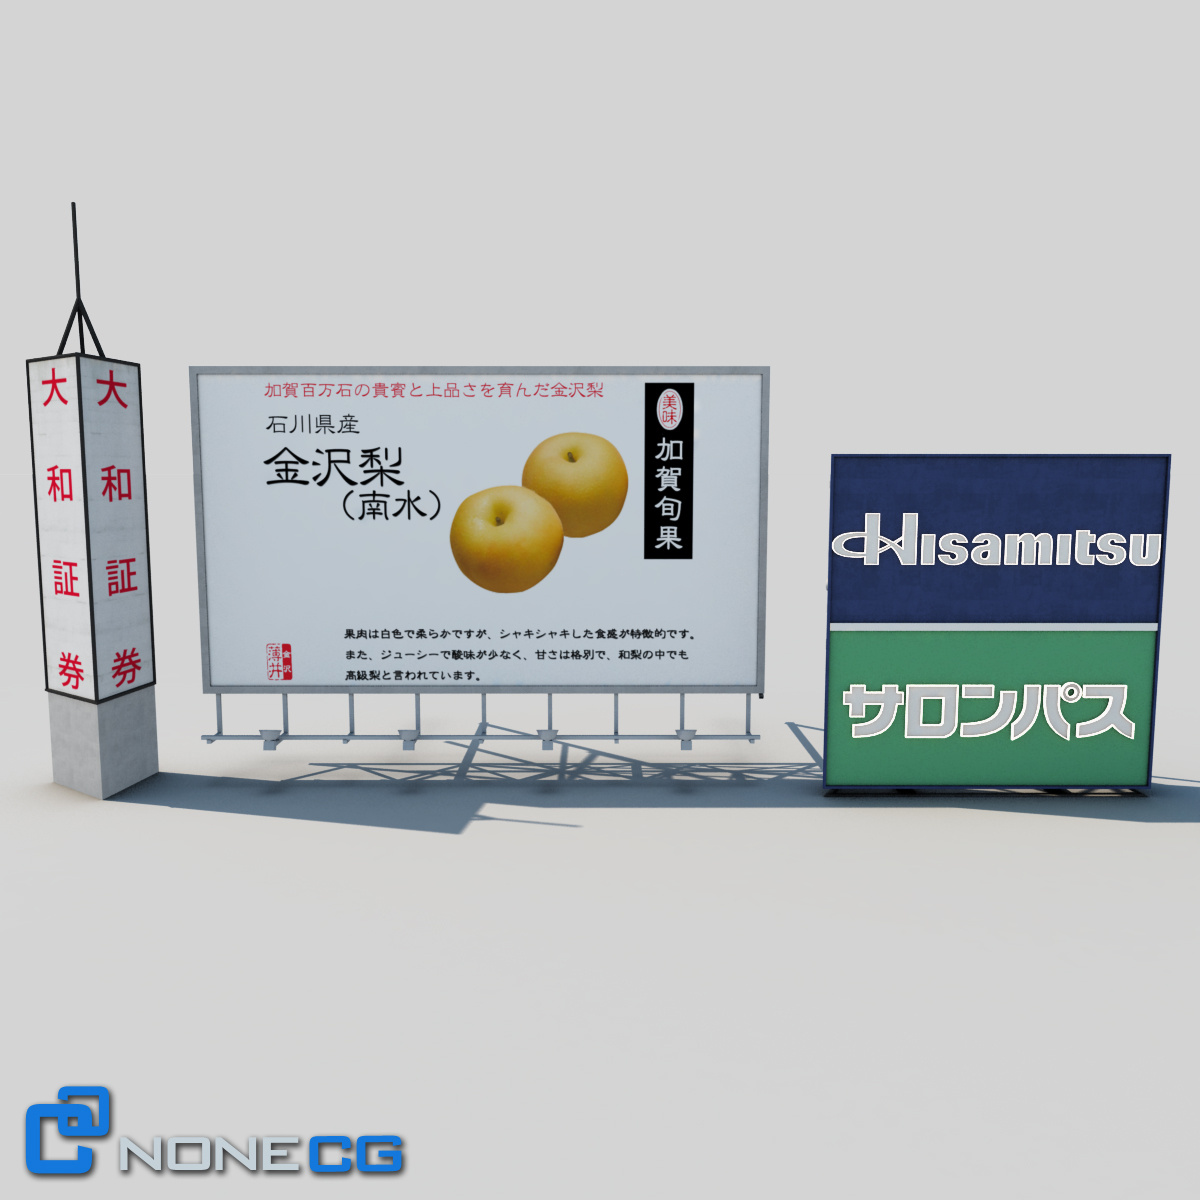 3d Cityscape Assets Download And Buy 3d Profestionnal Models On Nonecg Com